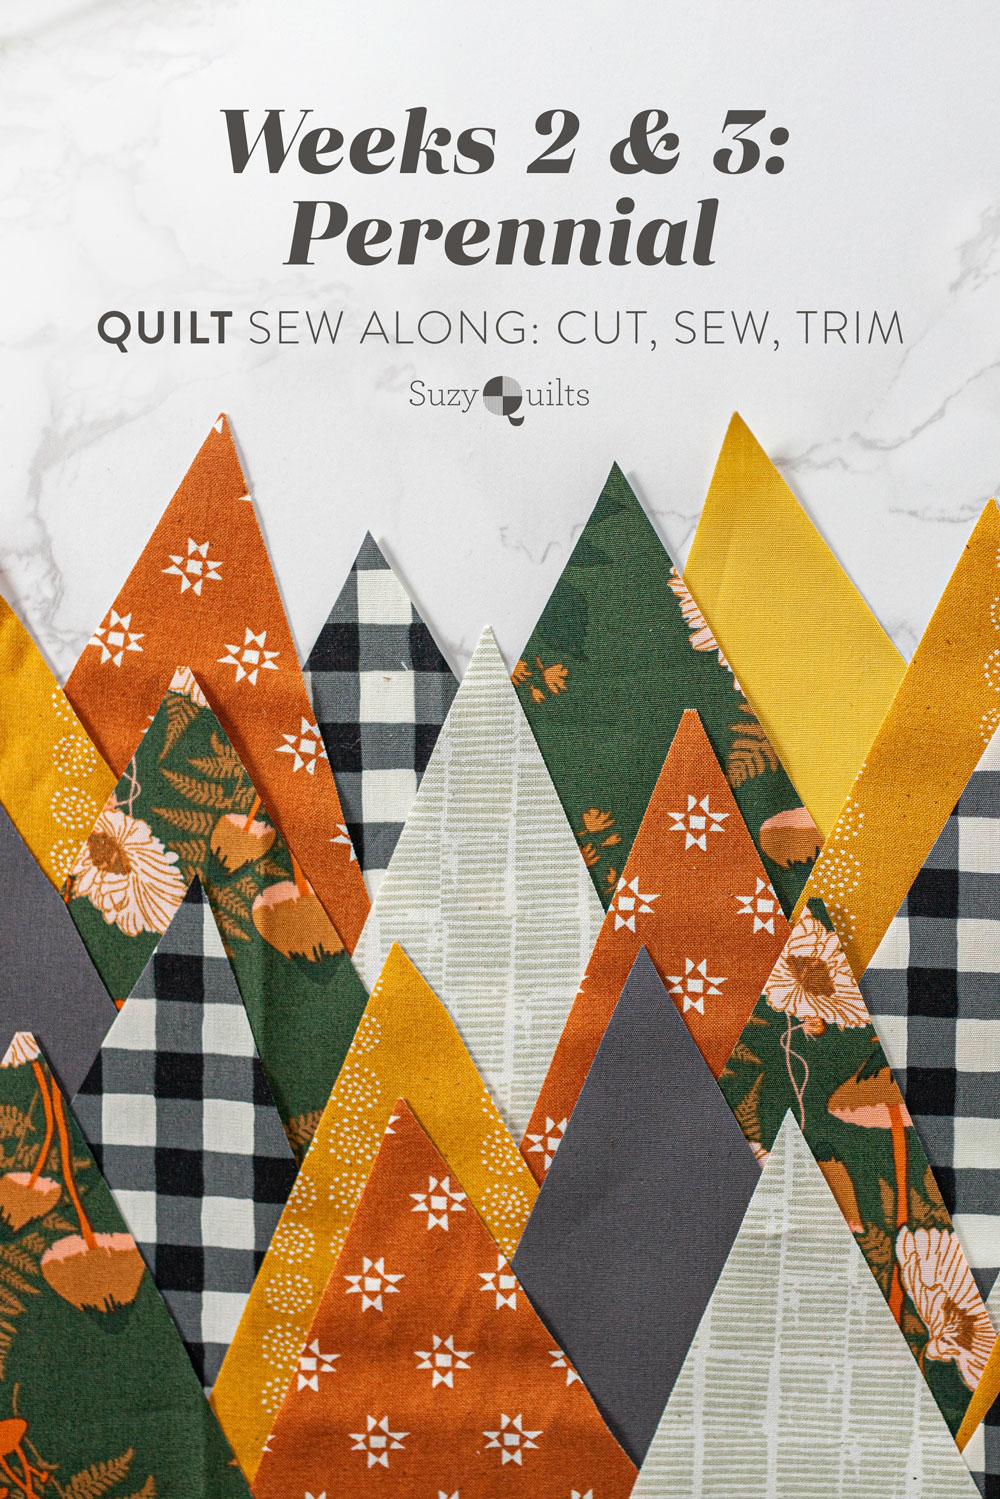 In Weeks 2 and 3 of the Perennial quilt sew along we cut, sew and trim our triangle blocks. I have some fun new tips to share too! suzyquilts.com